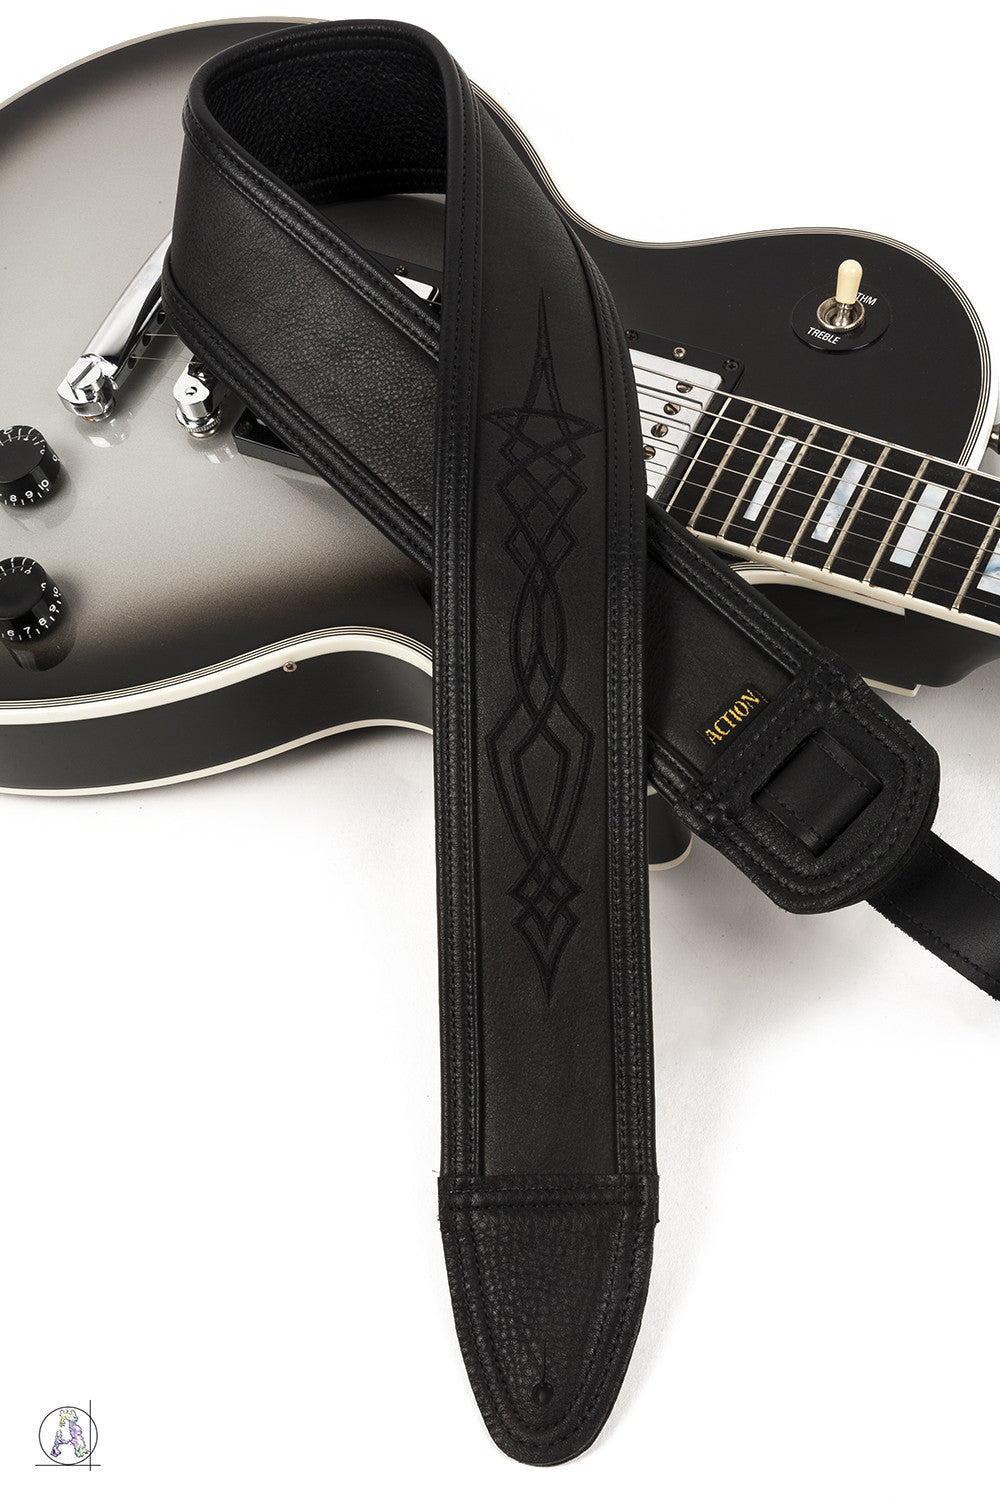 Stealth - Soft Black Leather Guitar Strap with Black Pinstriping